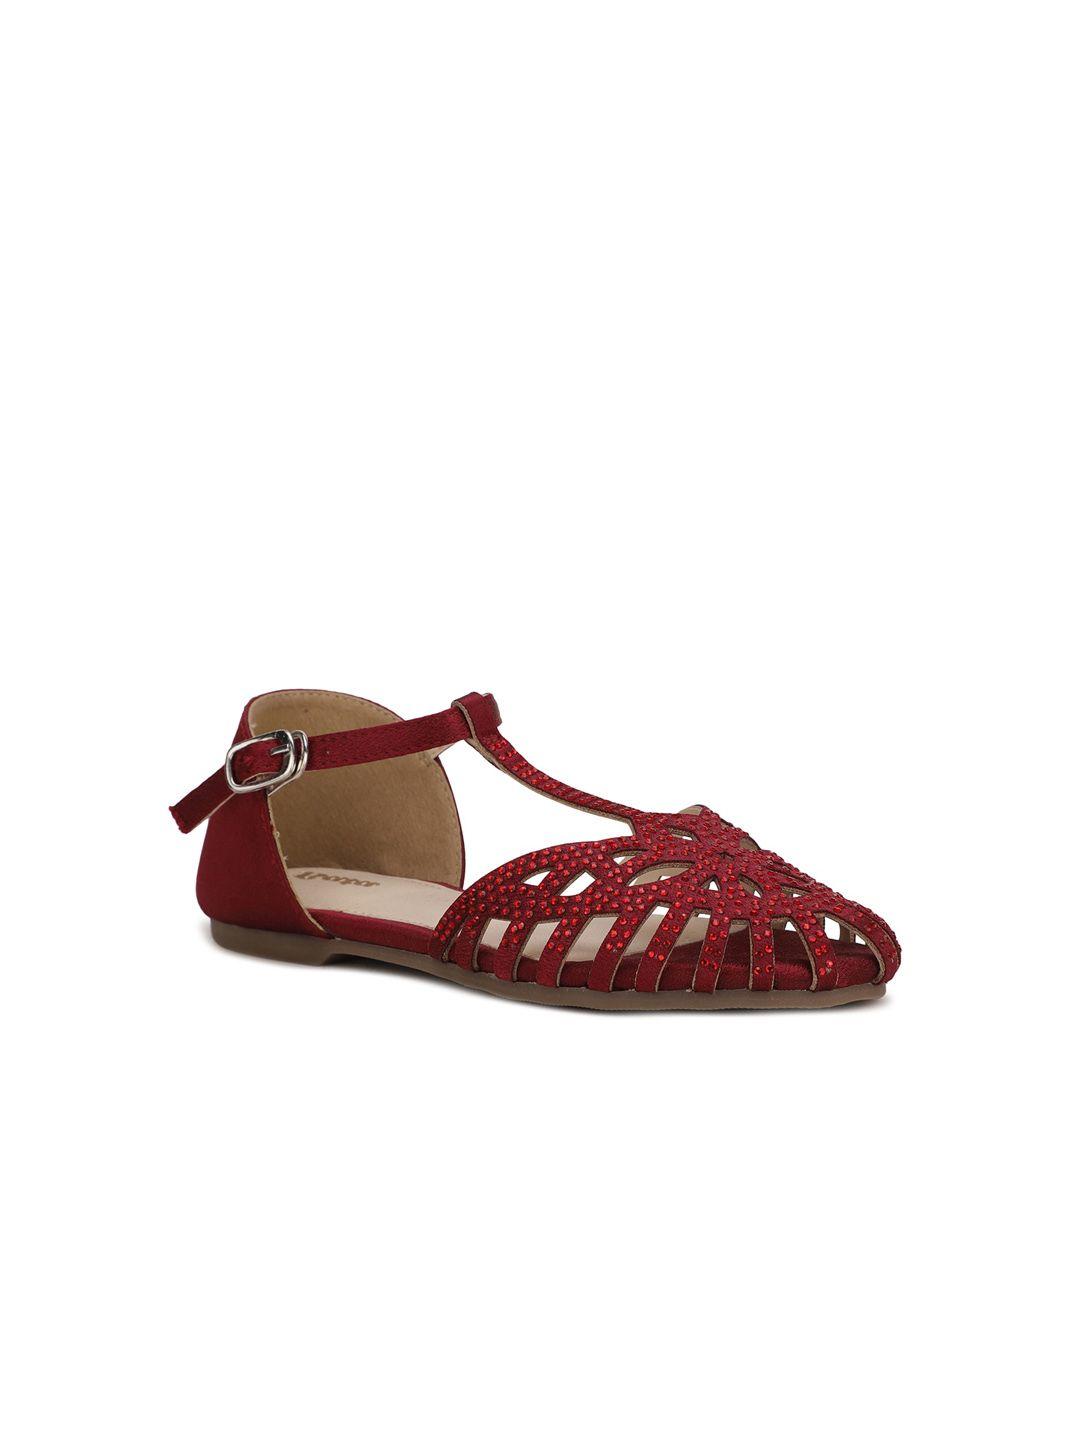 bata-girls-red-embellished-mules-flats-with-laser-cuts